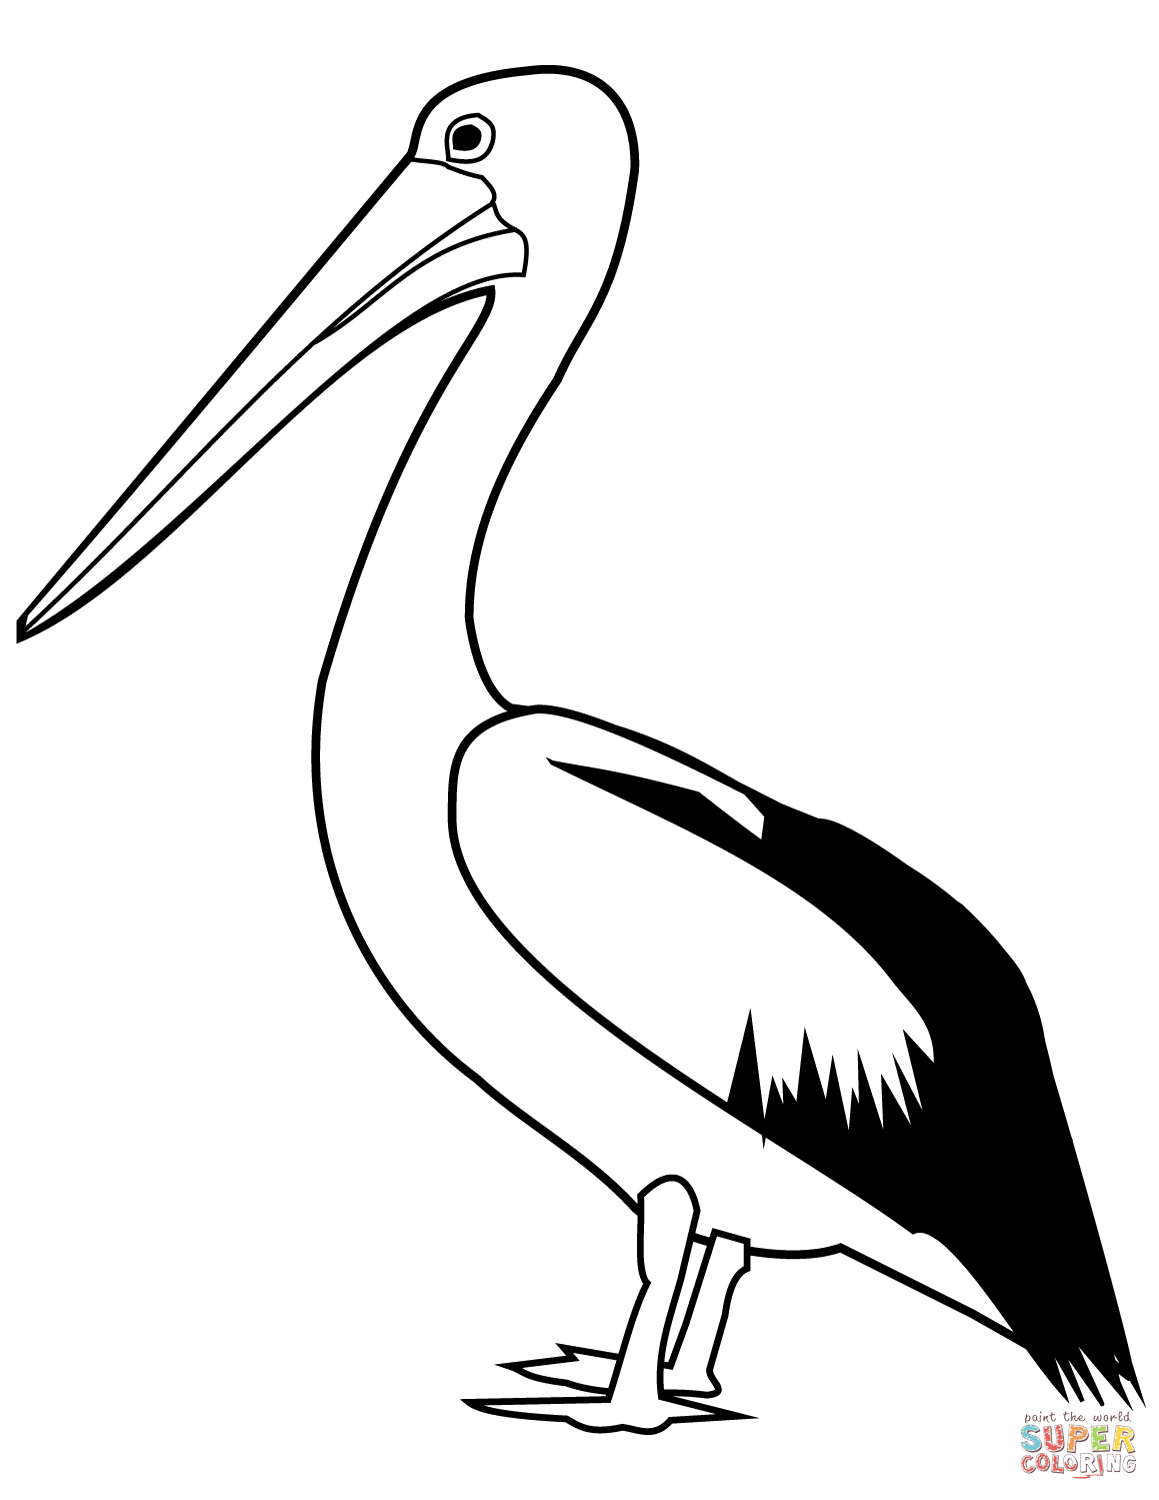 Pelican coloring page | Free Printable Coloring Pages